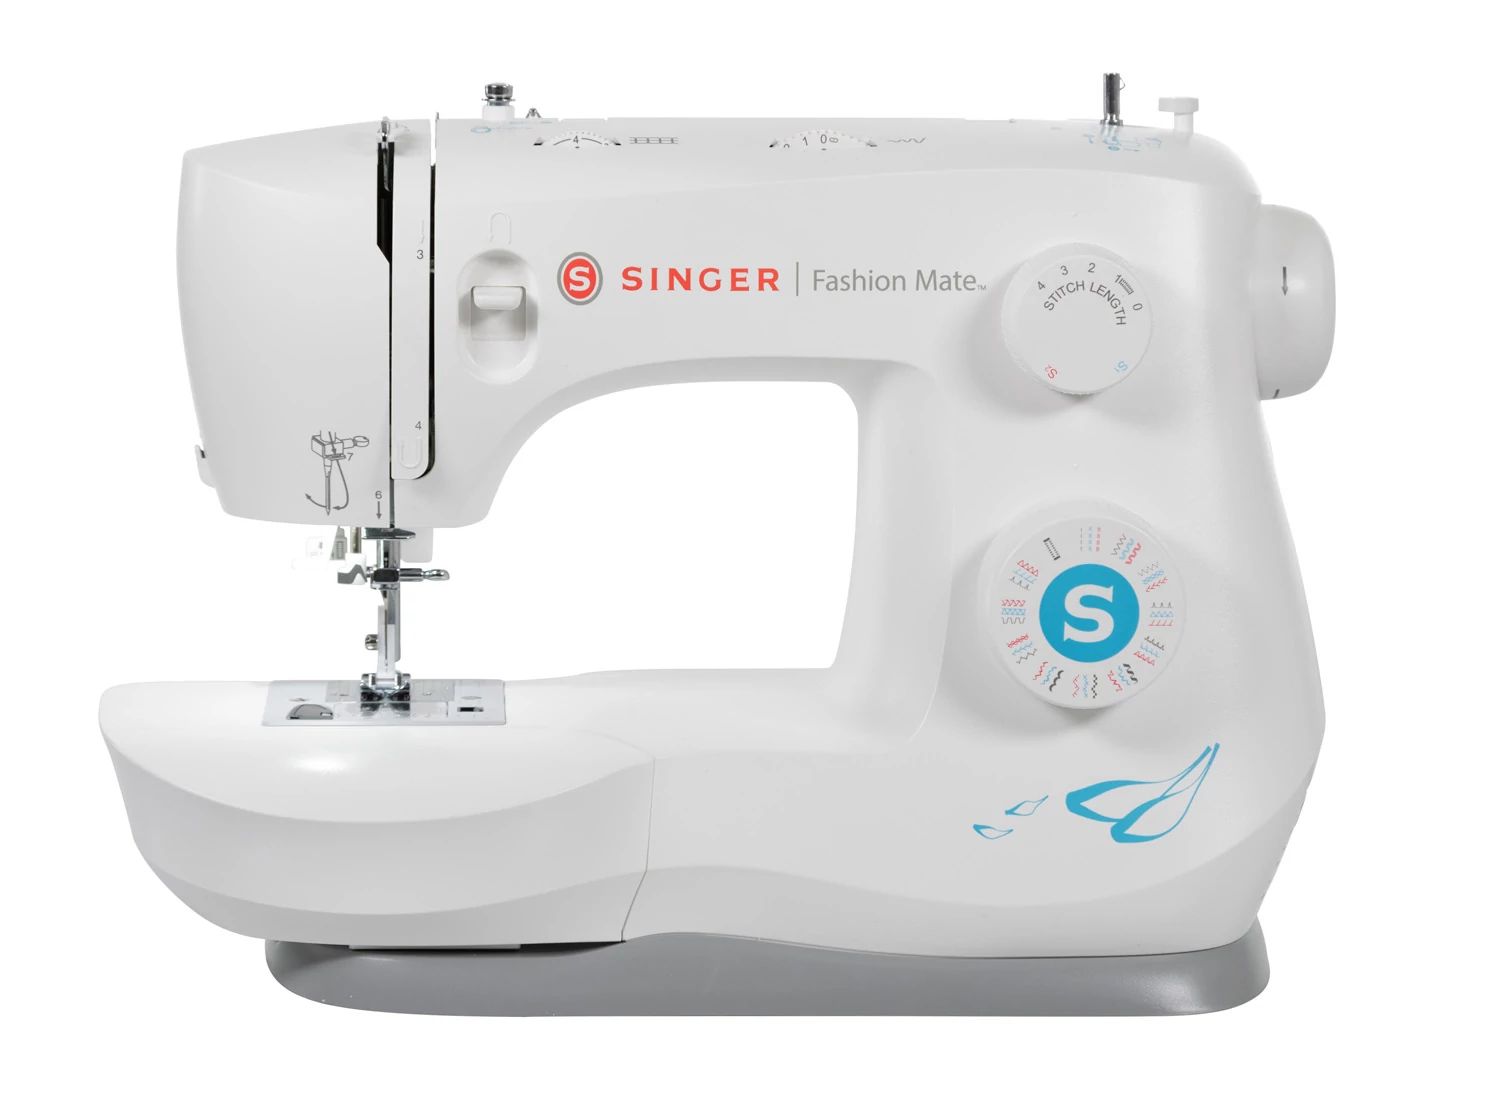 Singer Needle Threader Assistant With Bonus Sewing Thread And Hand Needles  : Target